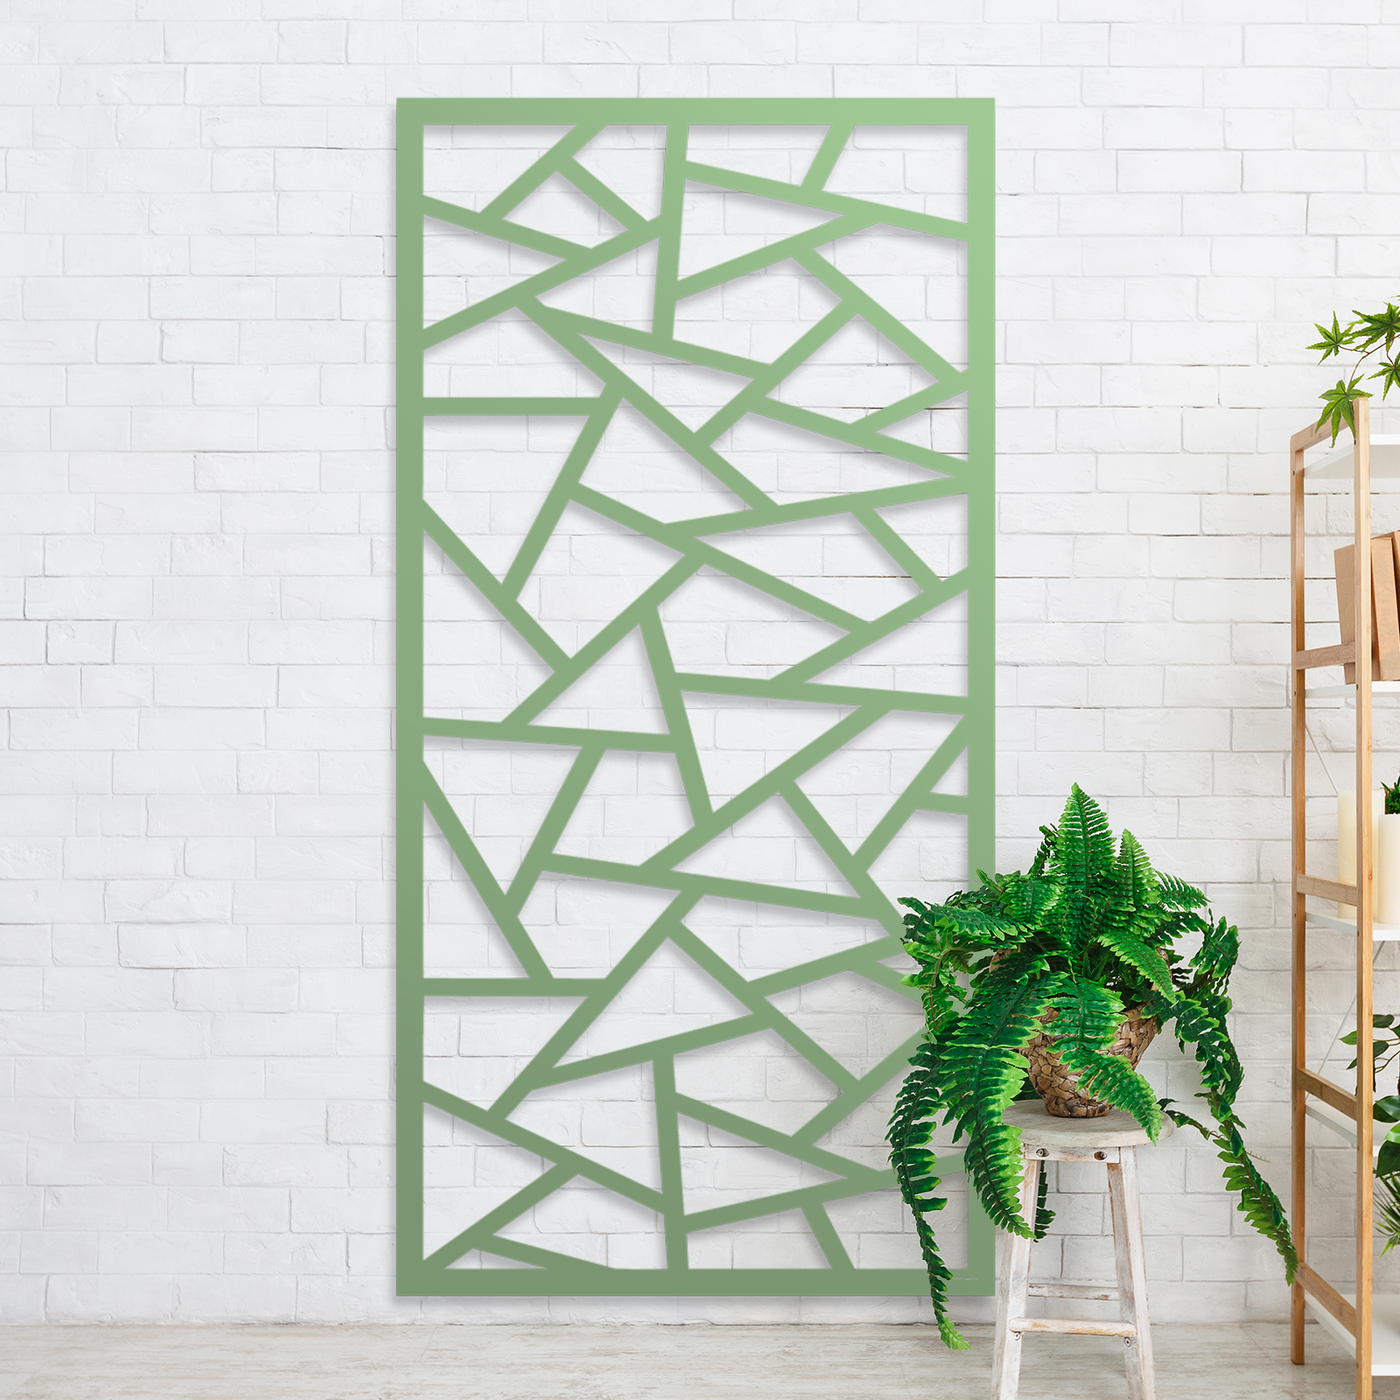 Bodega Metal Screen: A Garden Screen that is Both Functional and Stylish